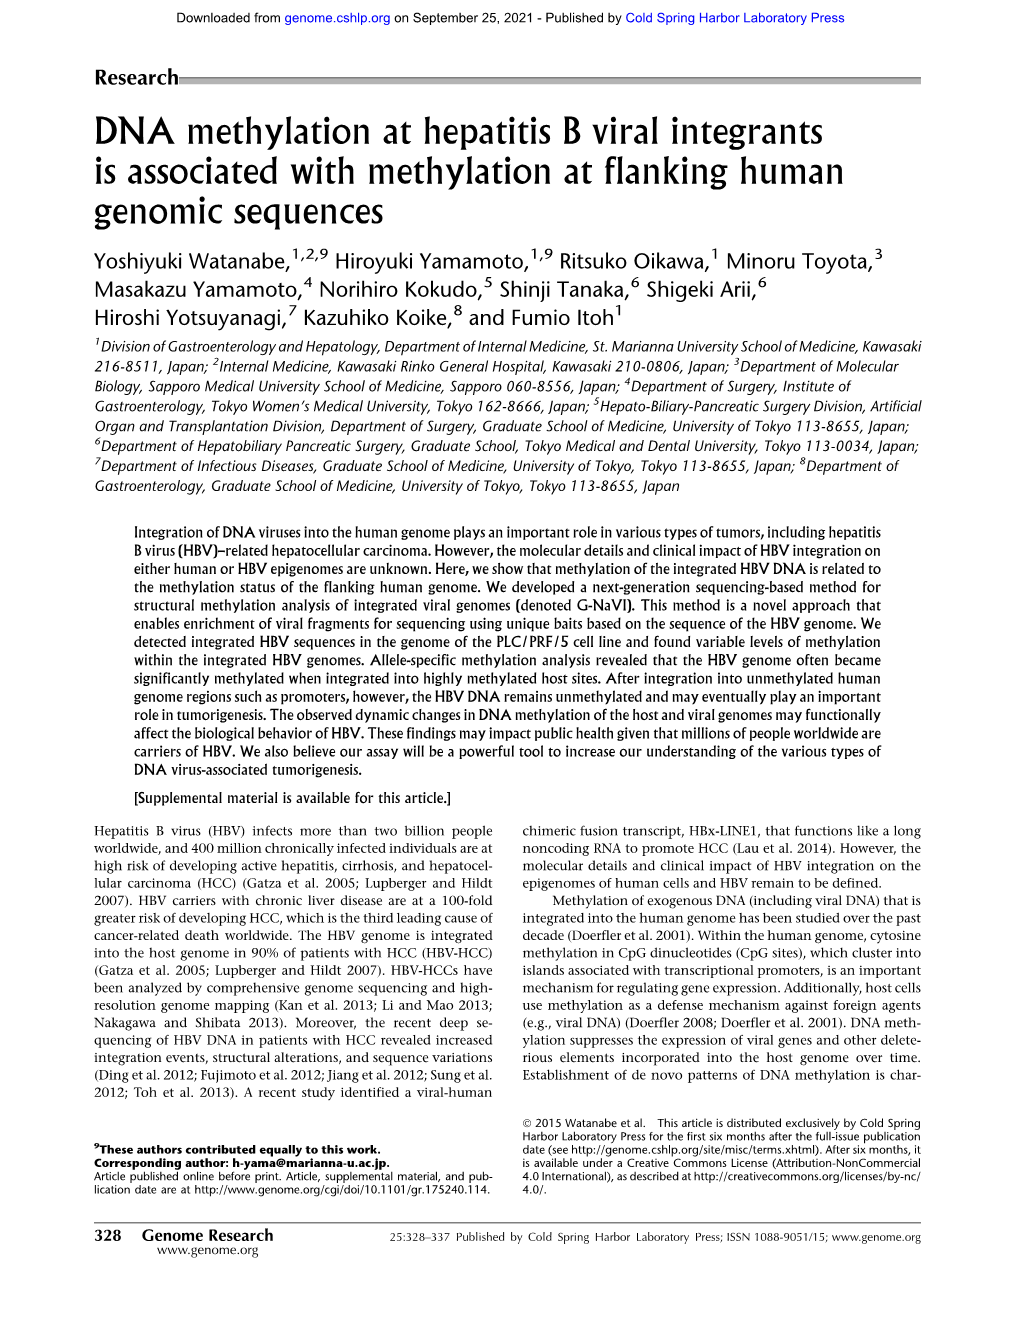 DNA Methylation at Hepatitis B Viral Integrants Is Associated with Methylation at Flanking Human Genomic Sequences